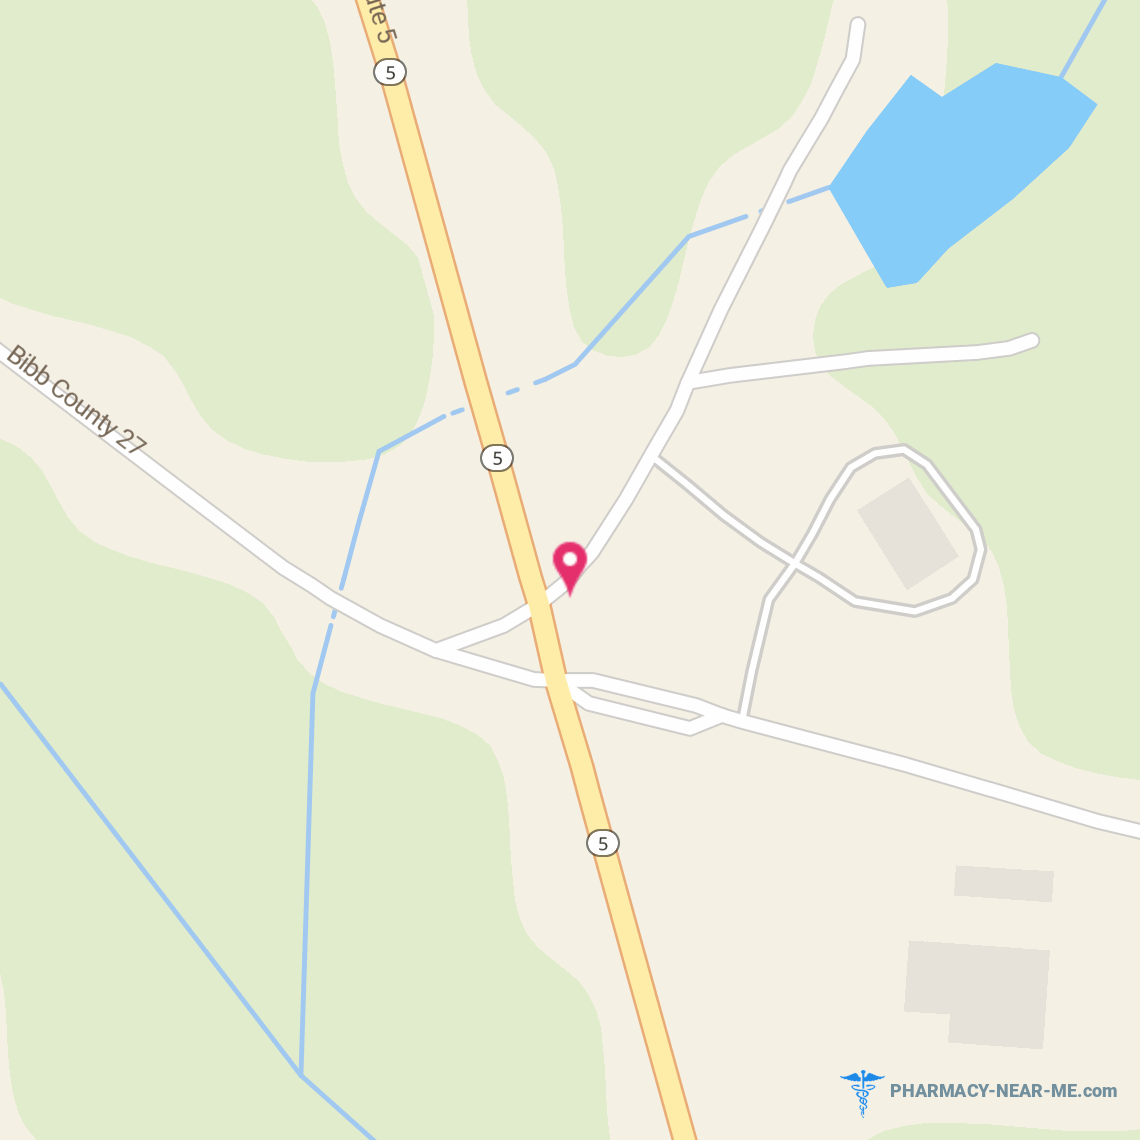 HITCHCOCK RX INC - Pharmacy Hours, Phone, Reviews & Information: 23010 Alabama Highway 5, West Blocton, Alabama 35184, United States